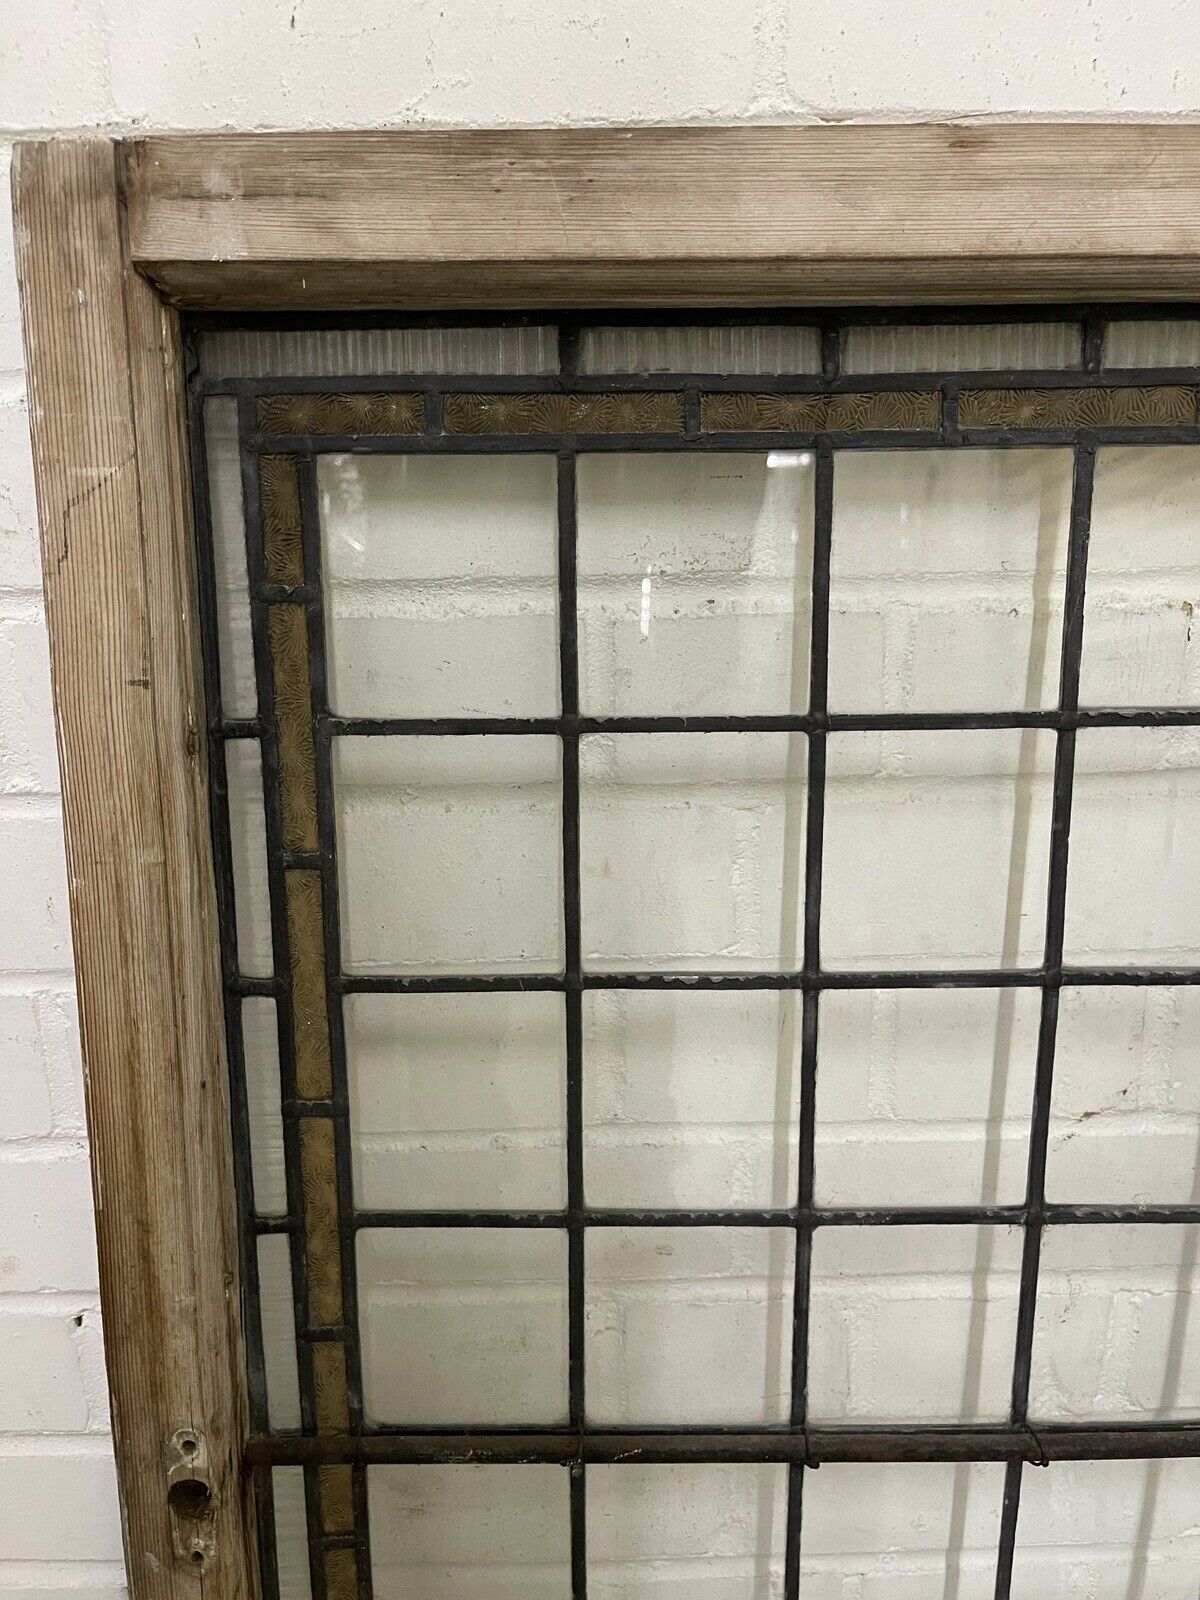 Pair Of Reclaimed Leaded Light Stained Glass Wooden Window Panels